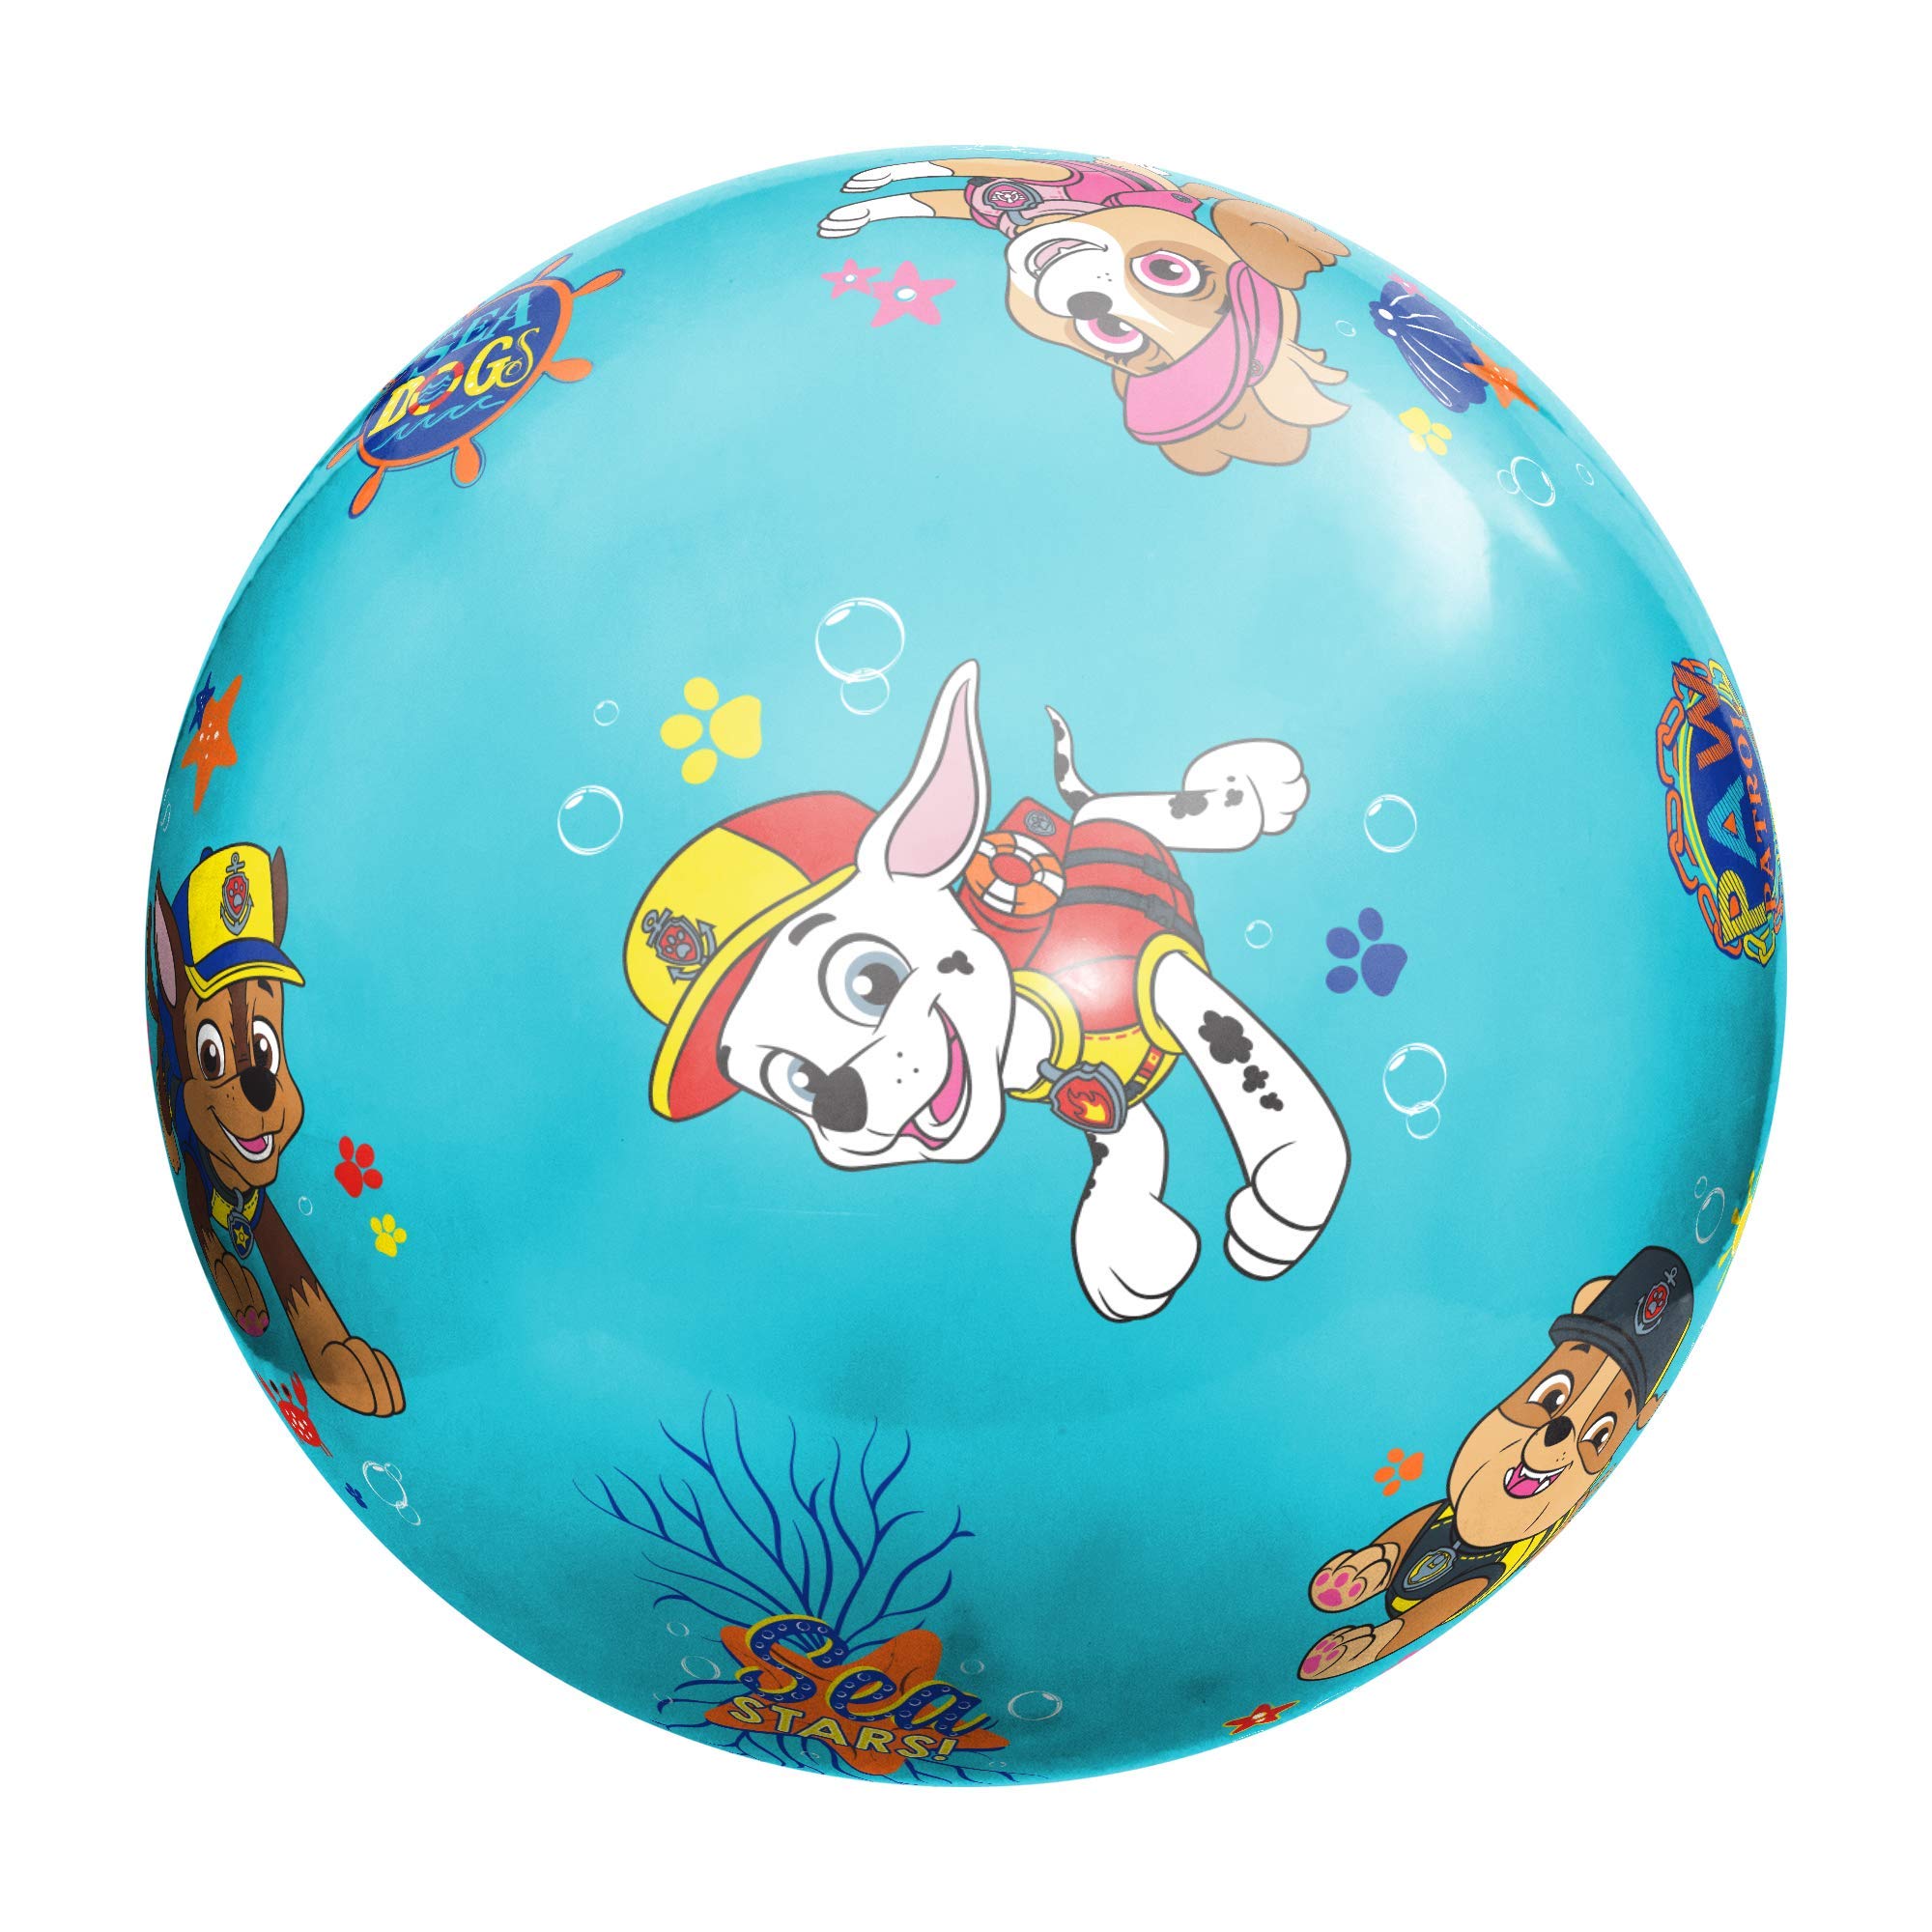 Hedstrom 20 Inch Super Bouncing Ball with Pump, Paw Patrol